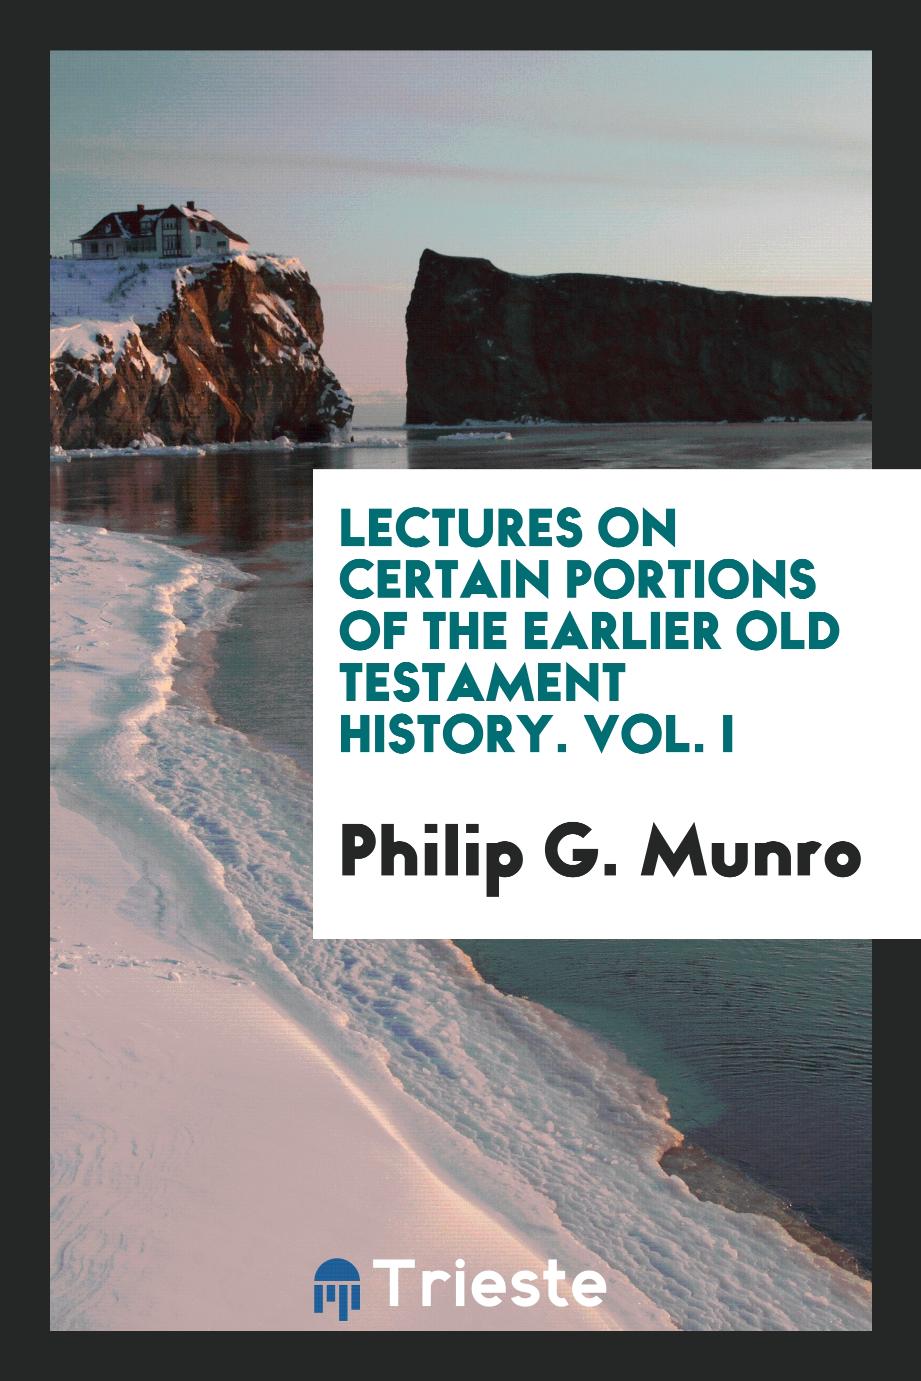 Lectures on certain portions of the earlier Old Testament history. Vol. I